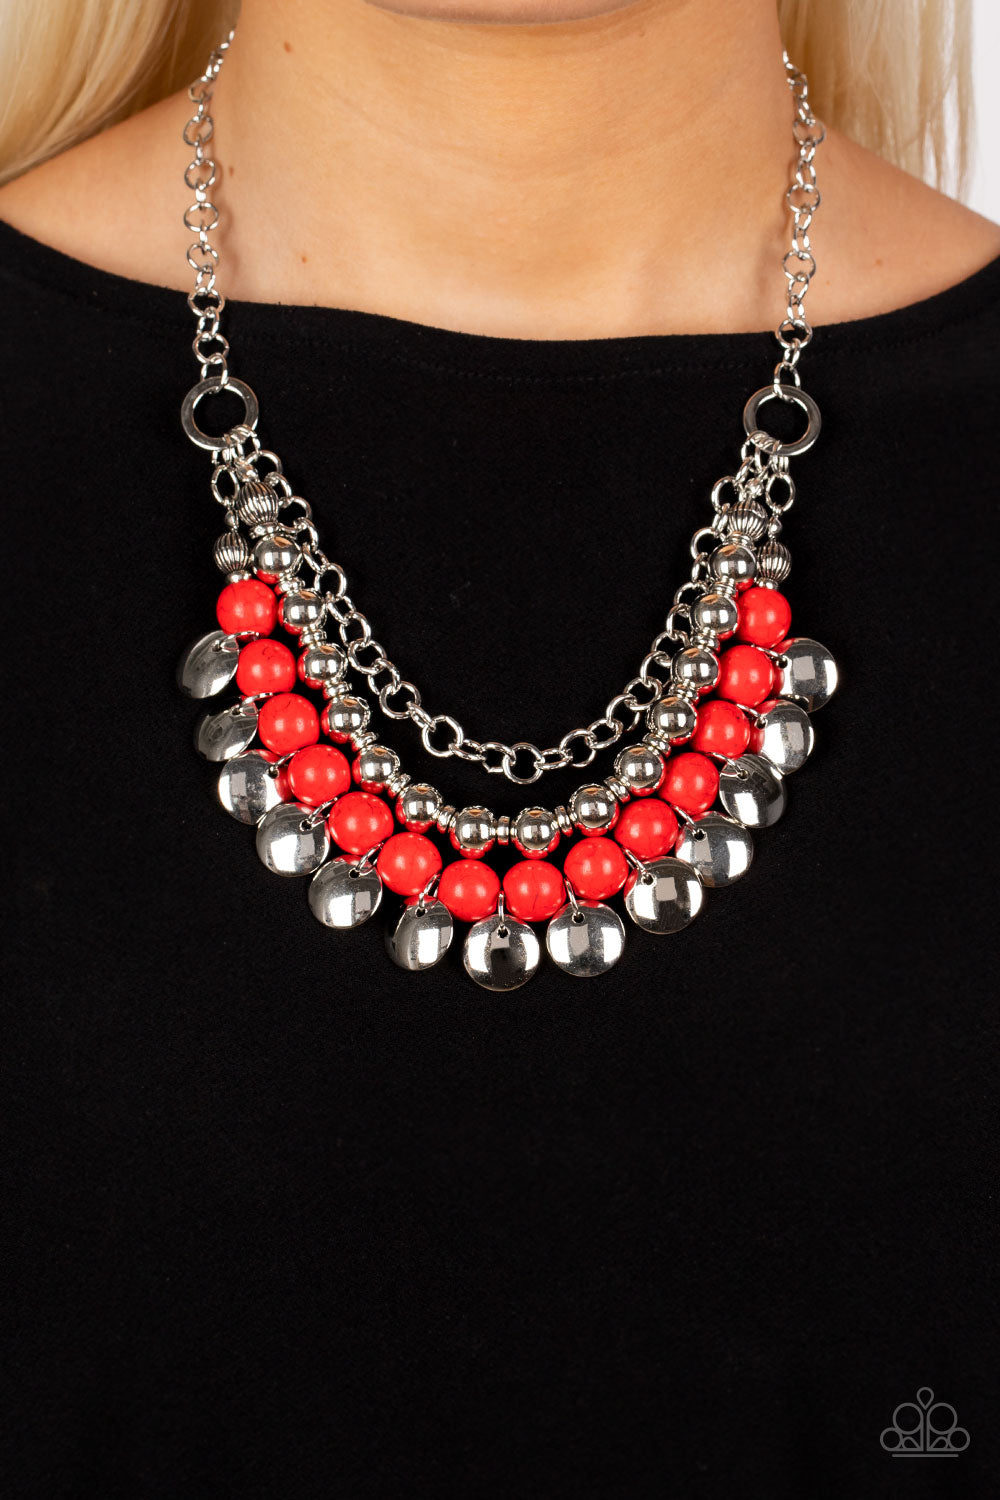 Leave Her Wild Red Paparazzi Necklace